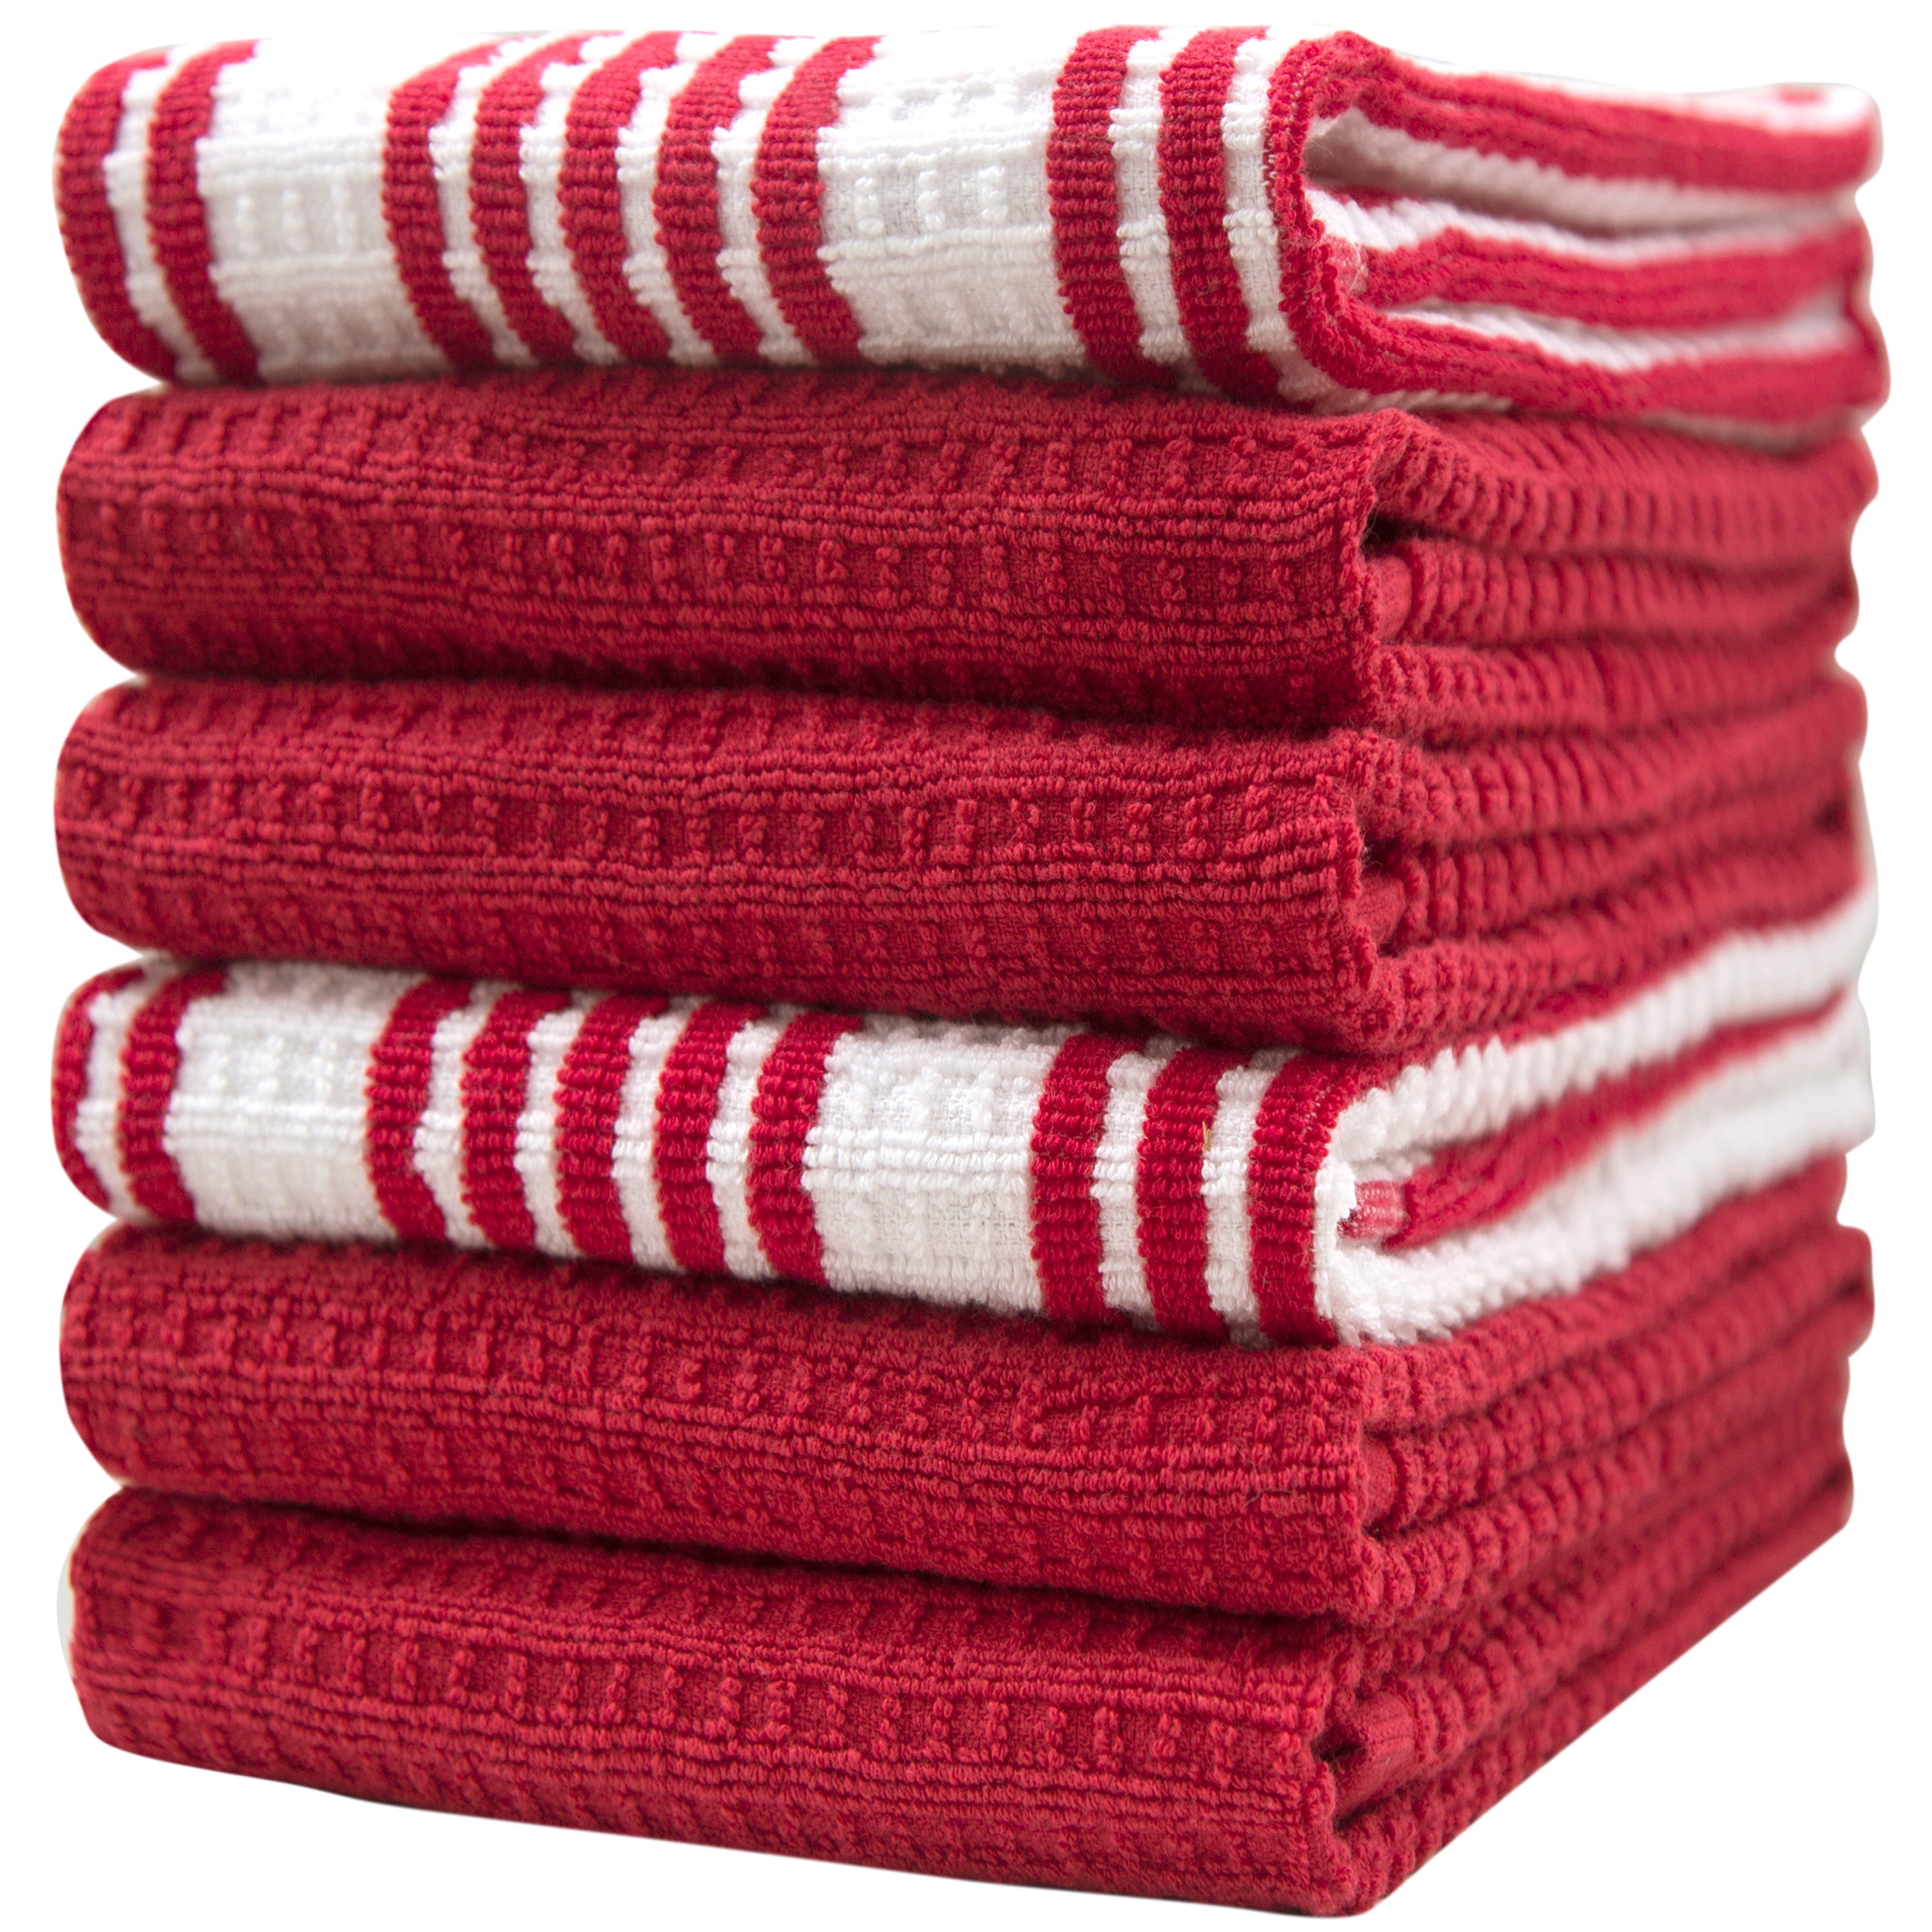 Premium Kitchen Towels And Dishcloths Set - Soft And Absorbent